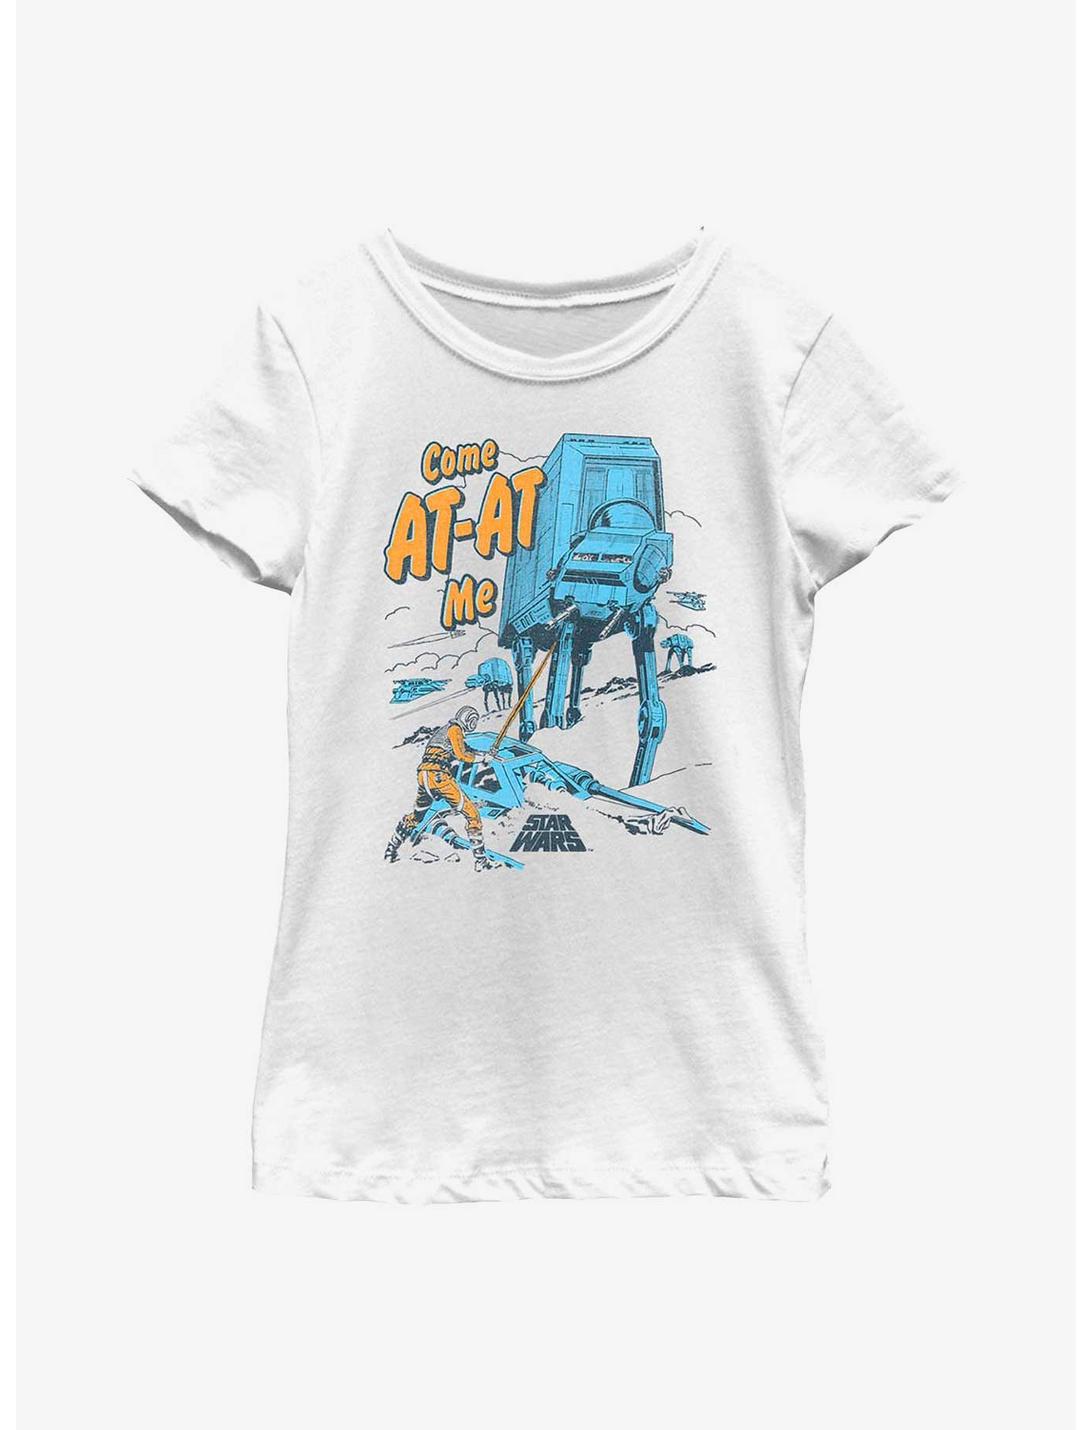 Star Wars Come AT-AT Me Youth Girls T-Shirt, WHITE, hi-res